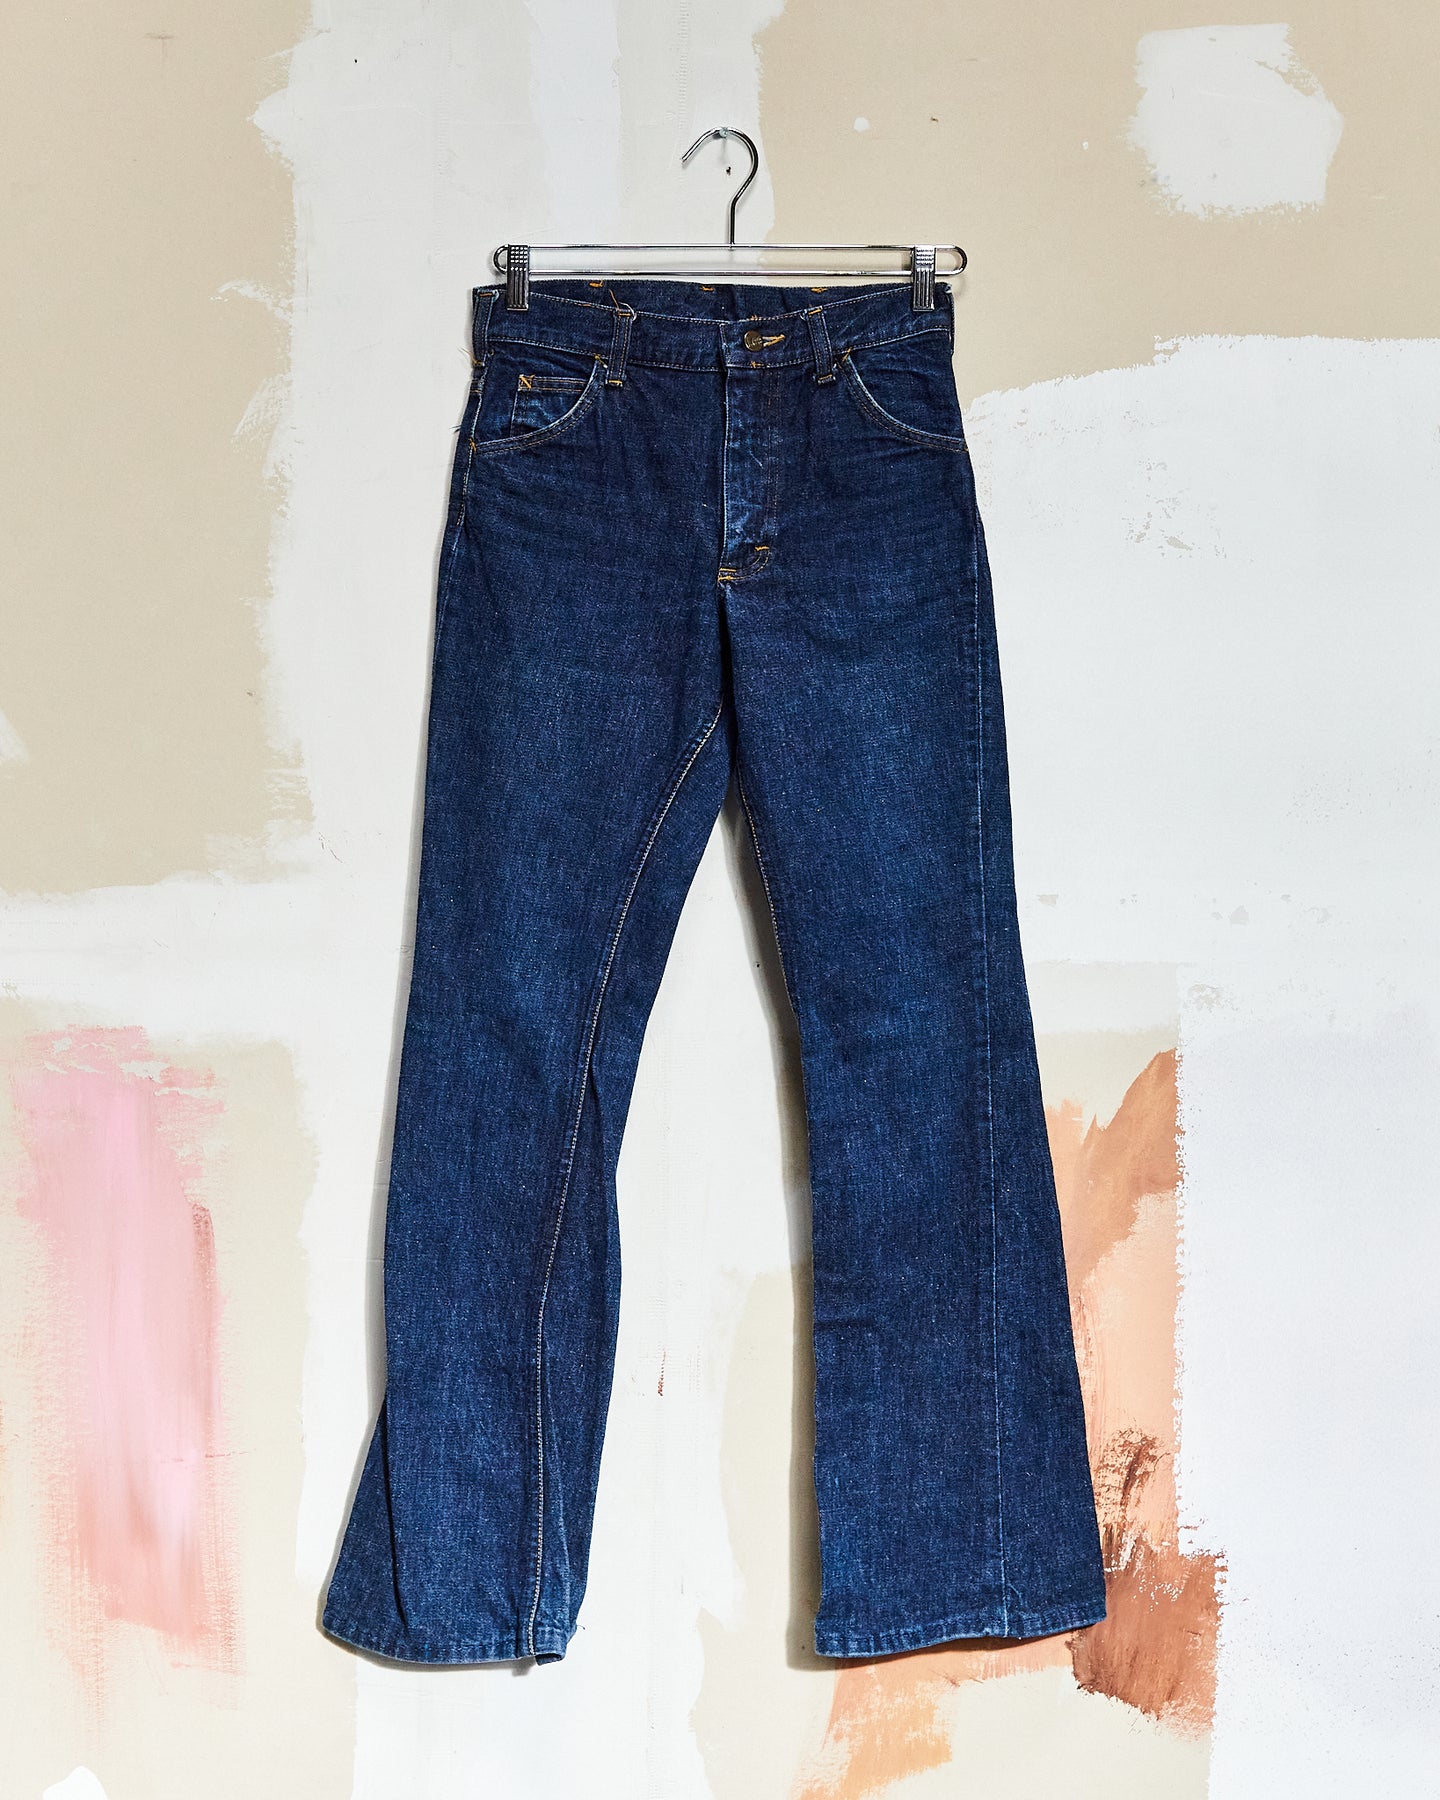 1970s Lee Jeans 27x32